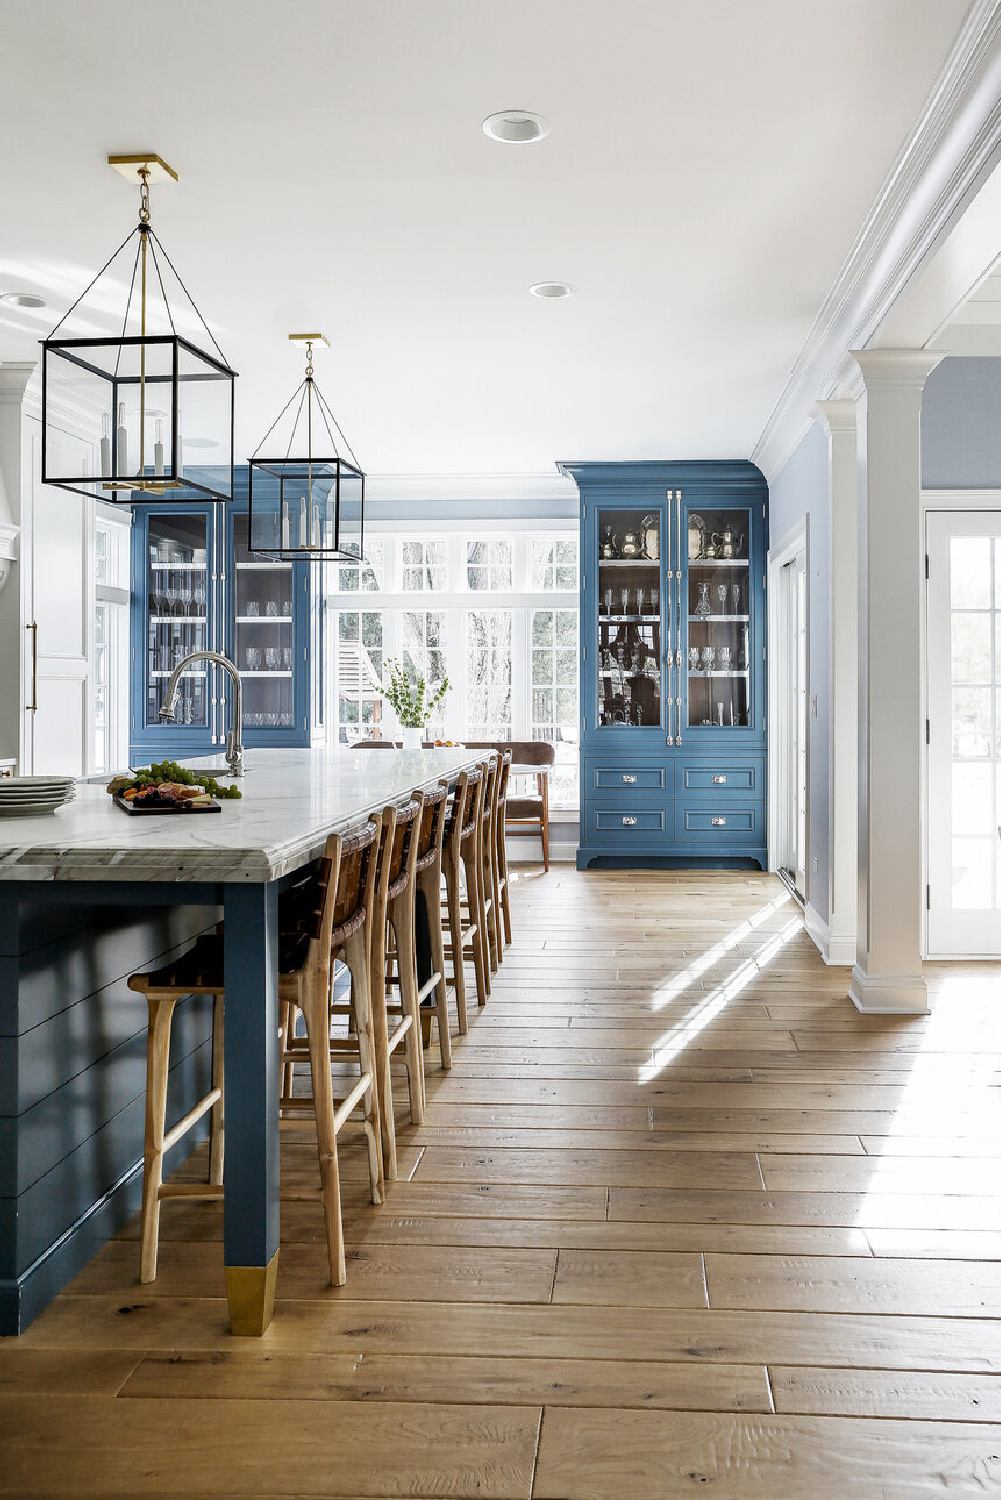 Classic blue kitchen design with traditional architecture, custom millwork, and sophisticated design - Edward Deegan Architects. #bluekitchens #traditionalkithens #classicbluekitchen